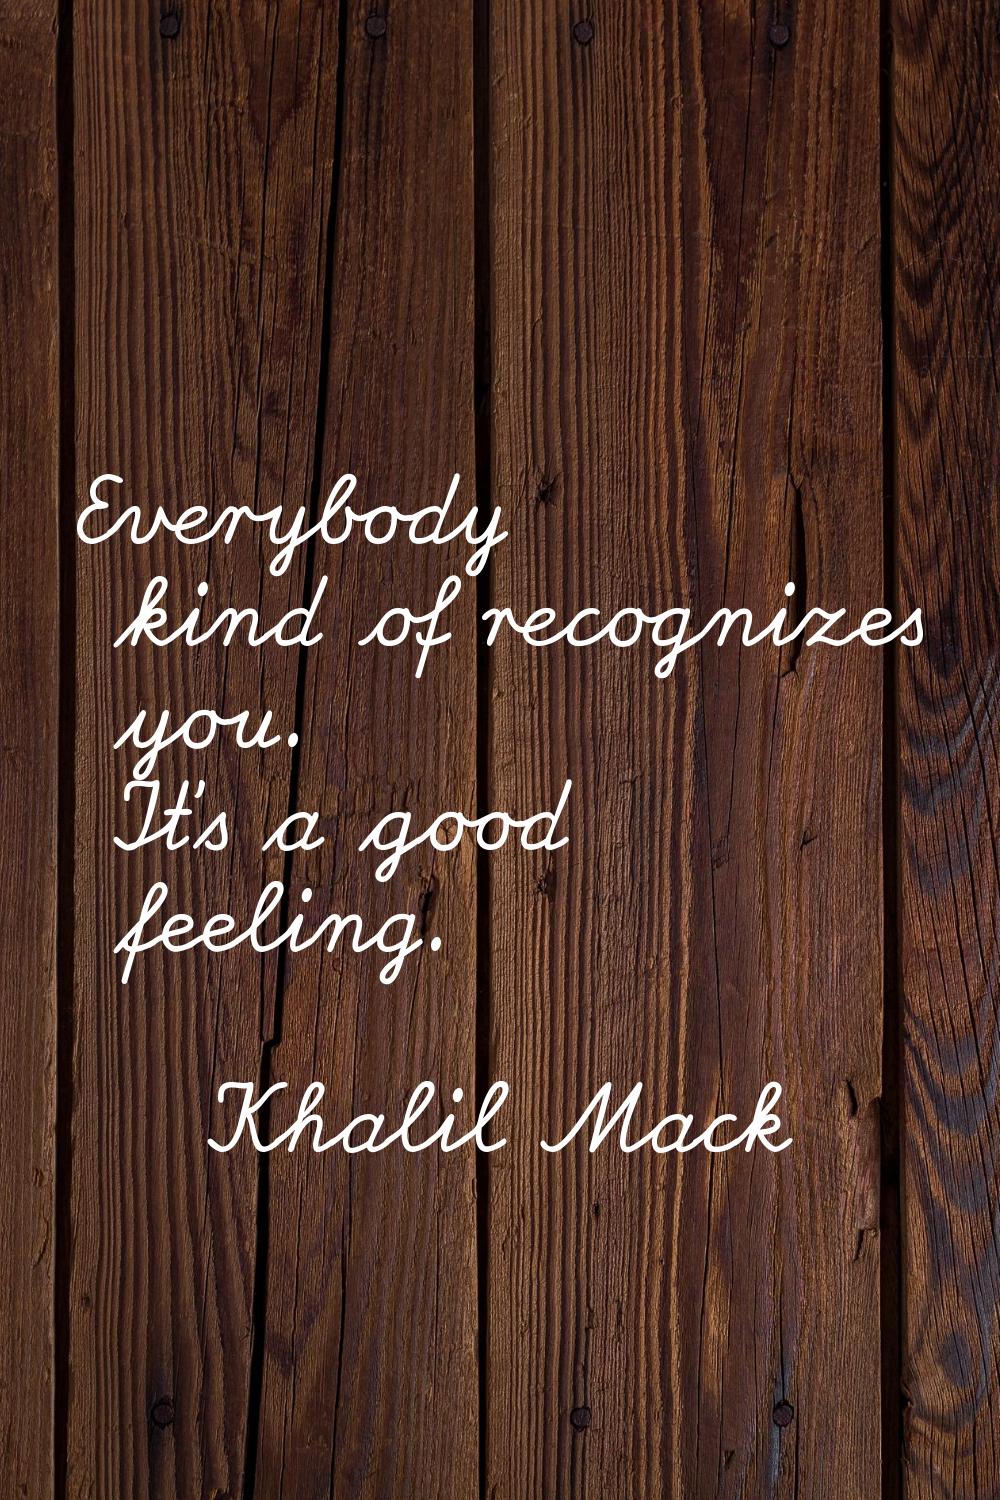 Everybody kind of recognizes you. It's a good feeling.